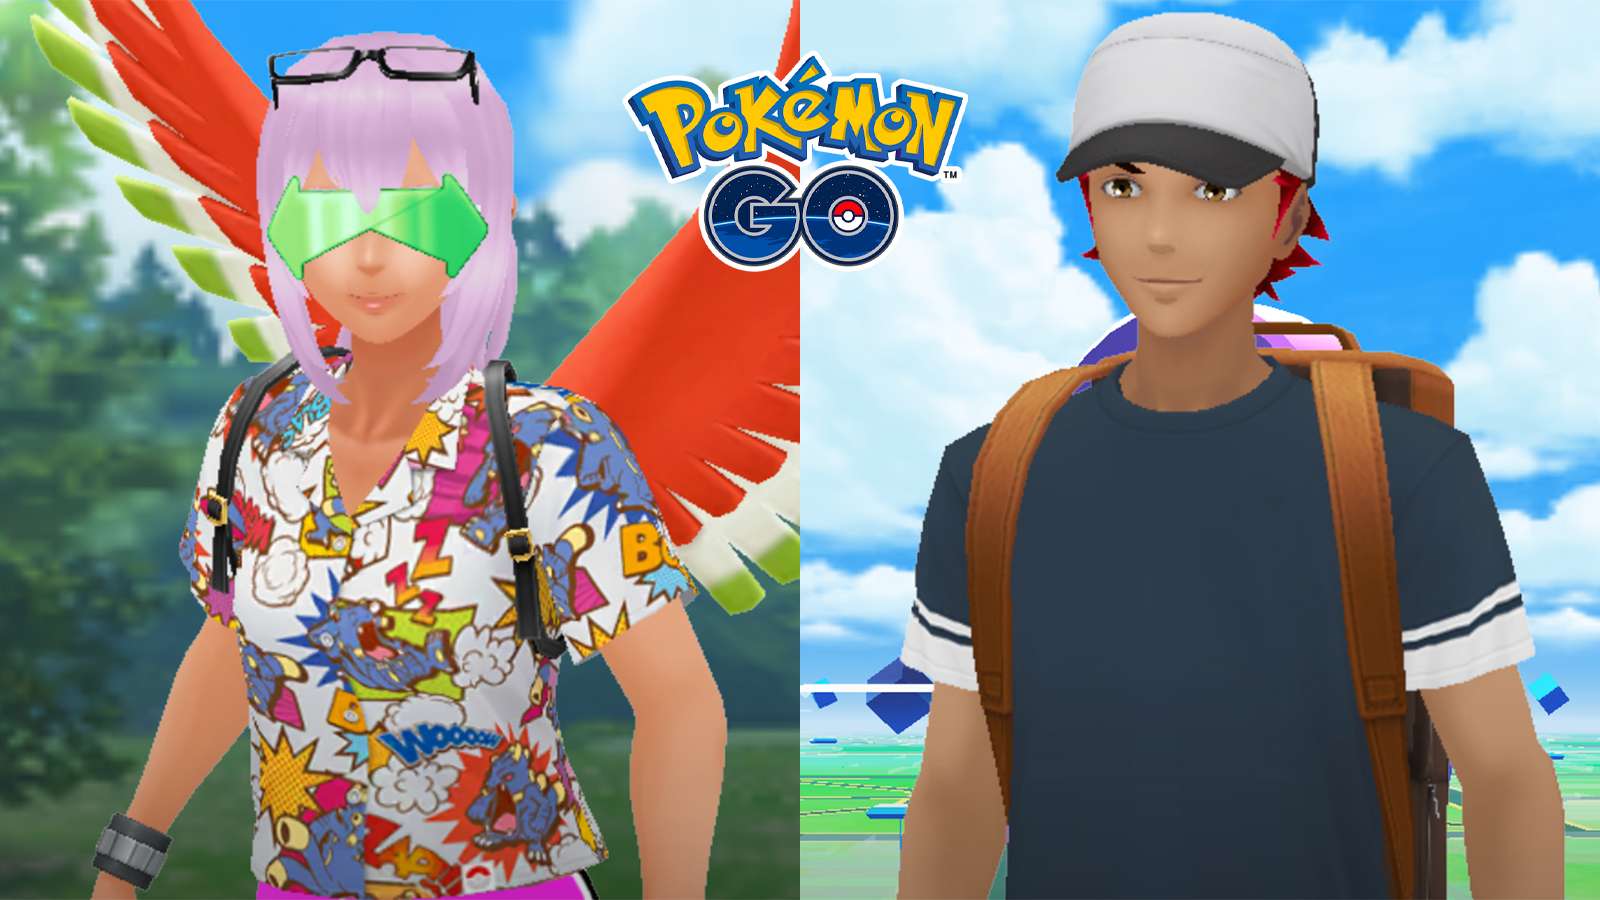 Challengers appearing in Pokemon Go with their lineups